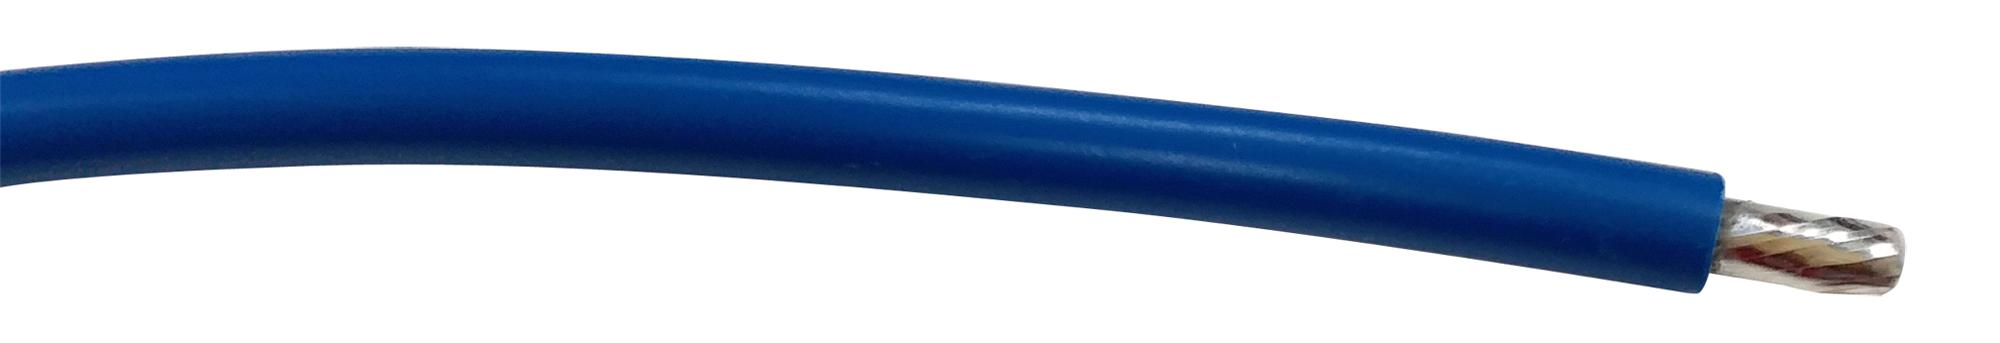 PP002538 CABLE WIRE, 24AWG, BLUE, 305M PRO POWER